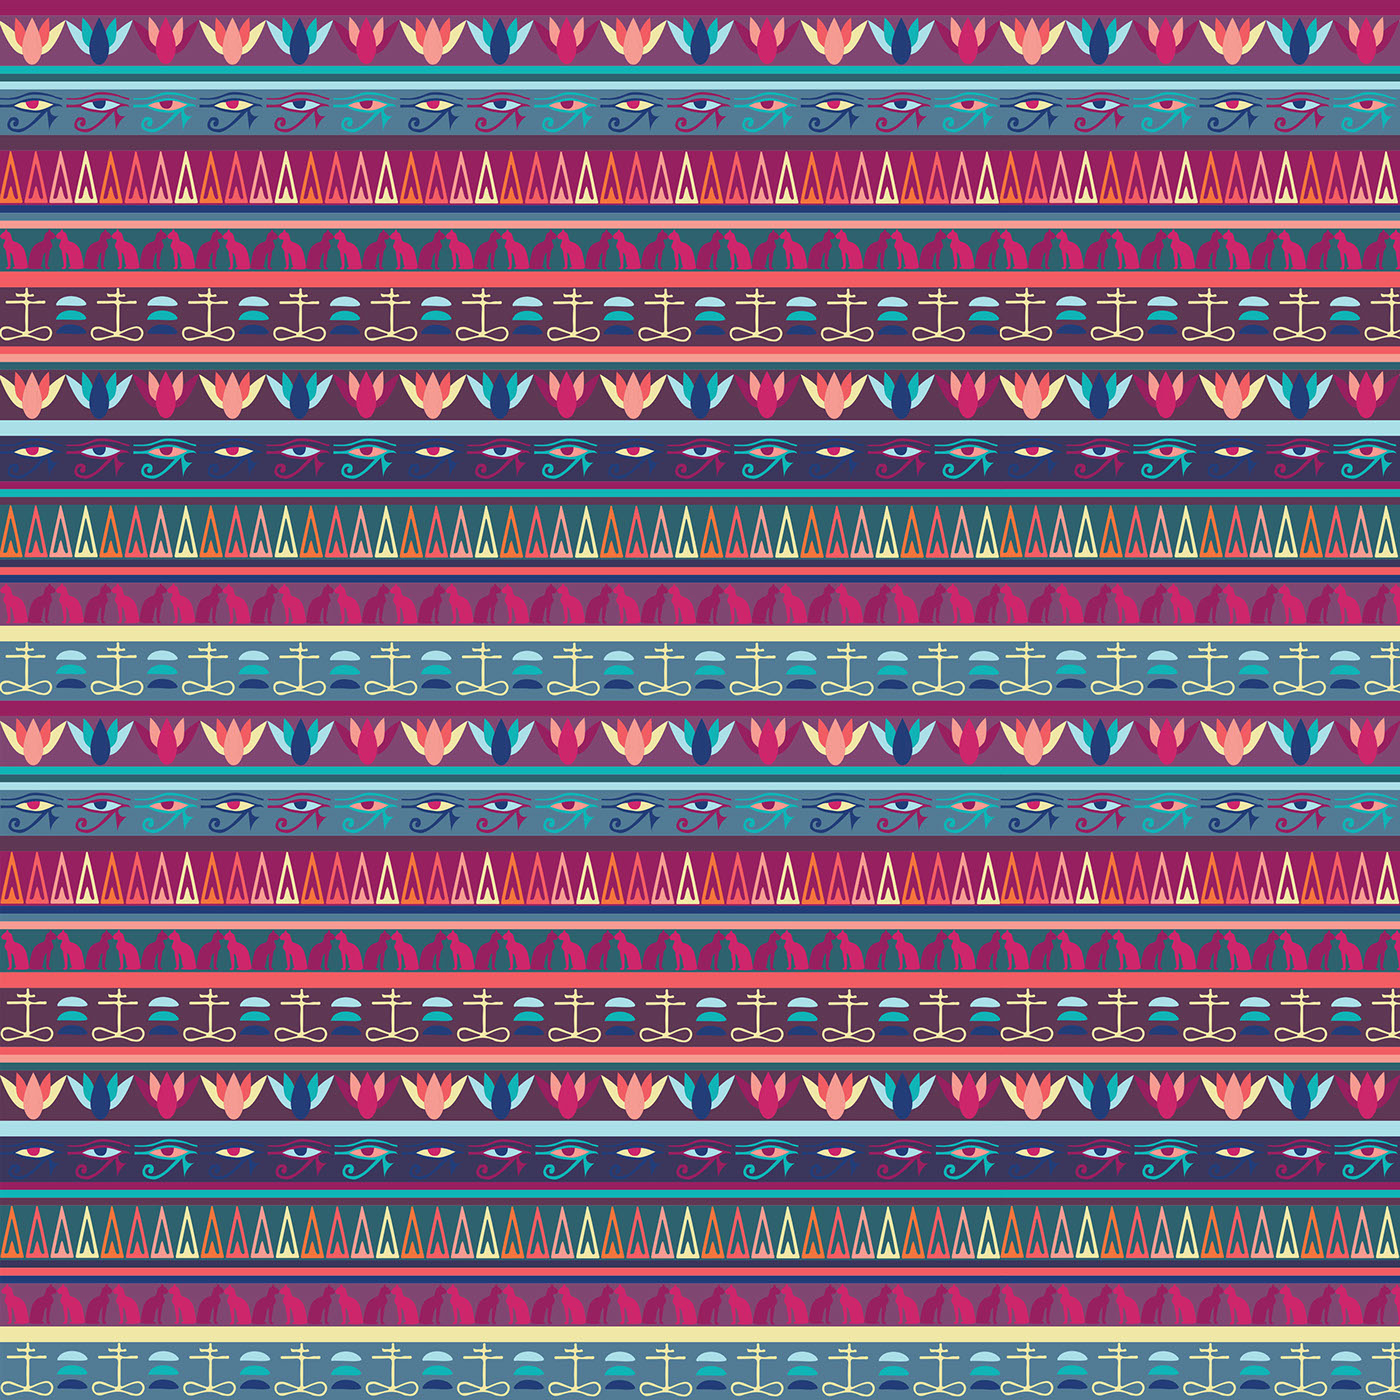 surfacedesign textiledesign fabric editorial photoshop Illustrator egyptian inspired vector PrintandPattern printmaking prints repeats characters